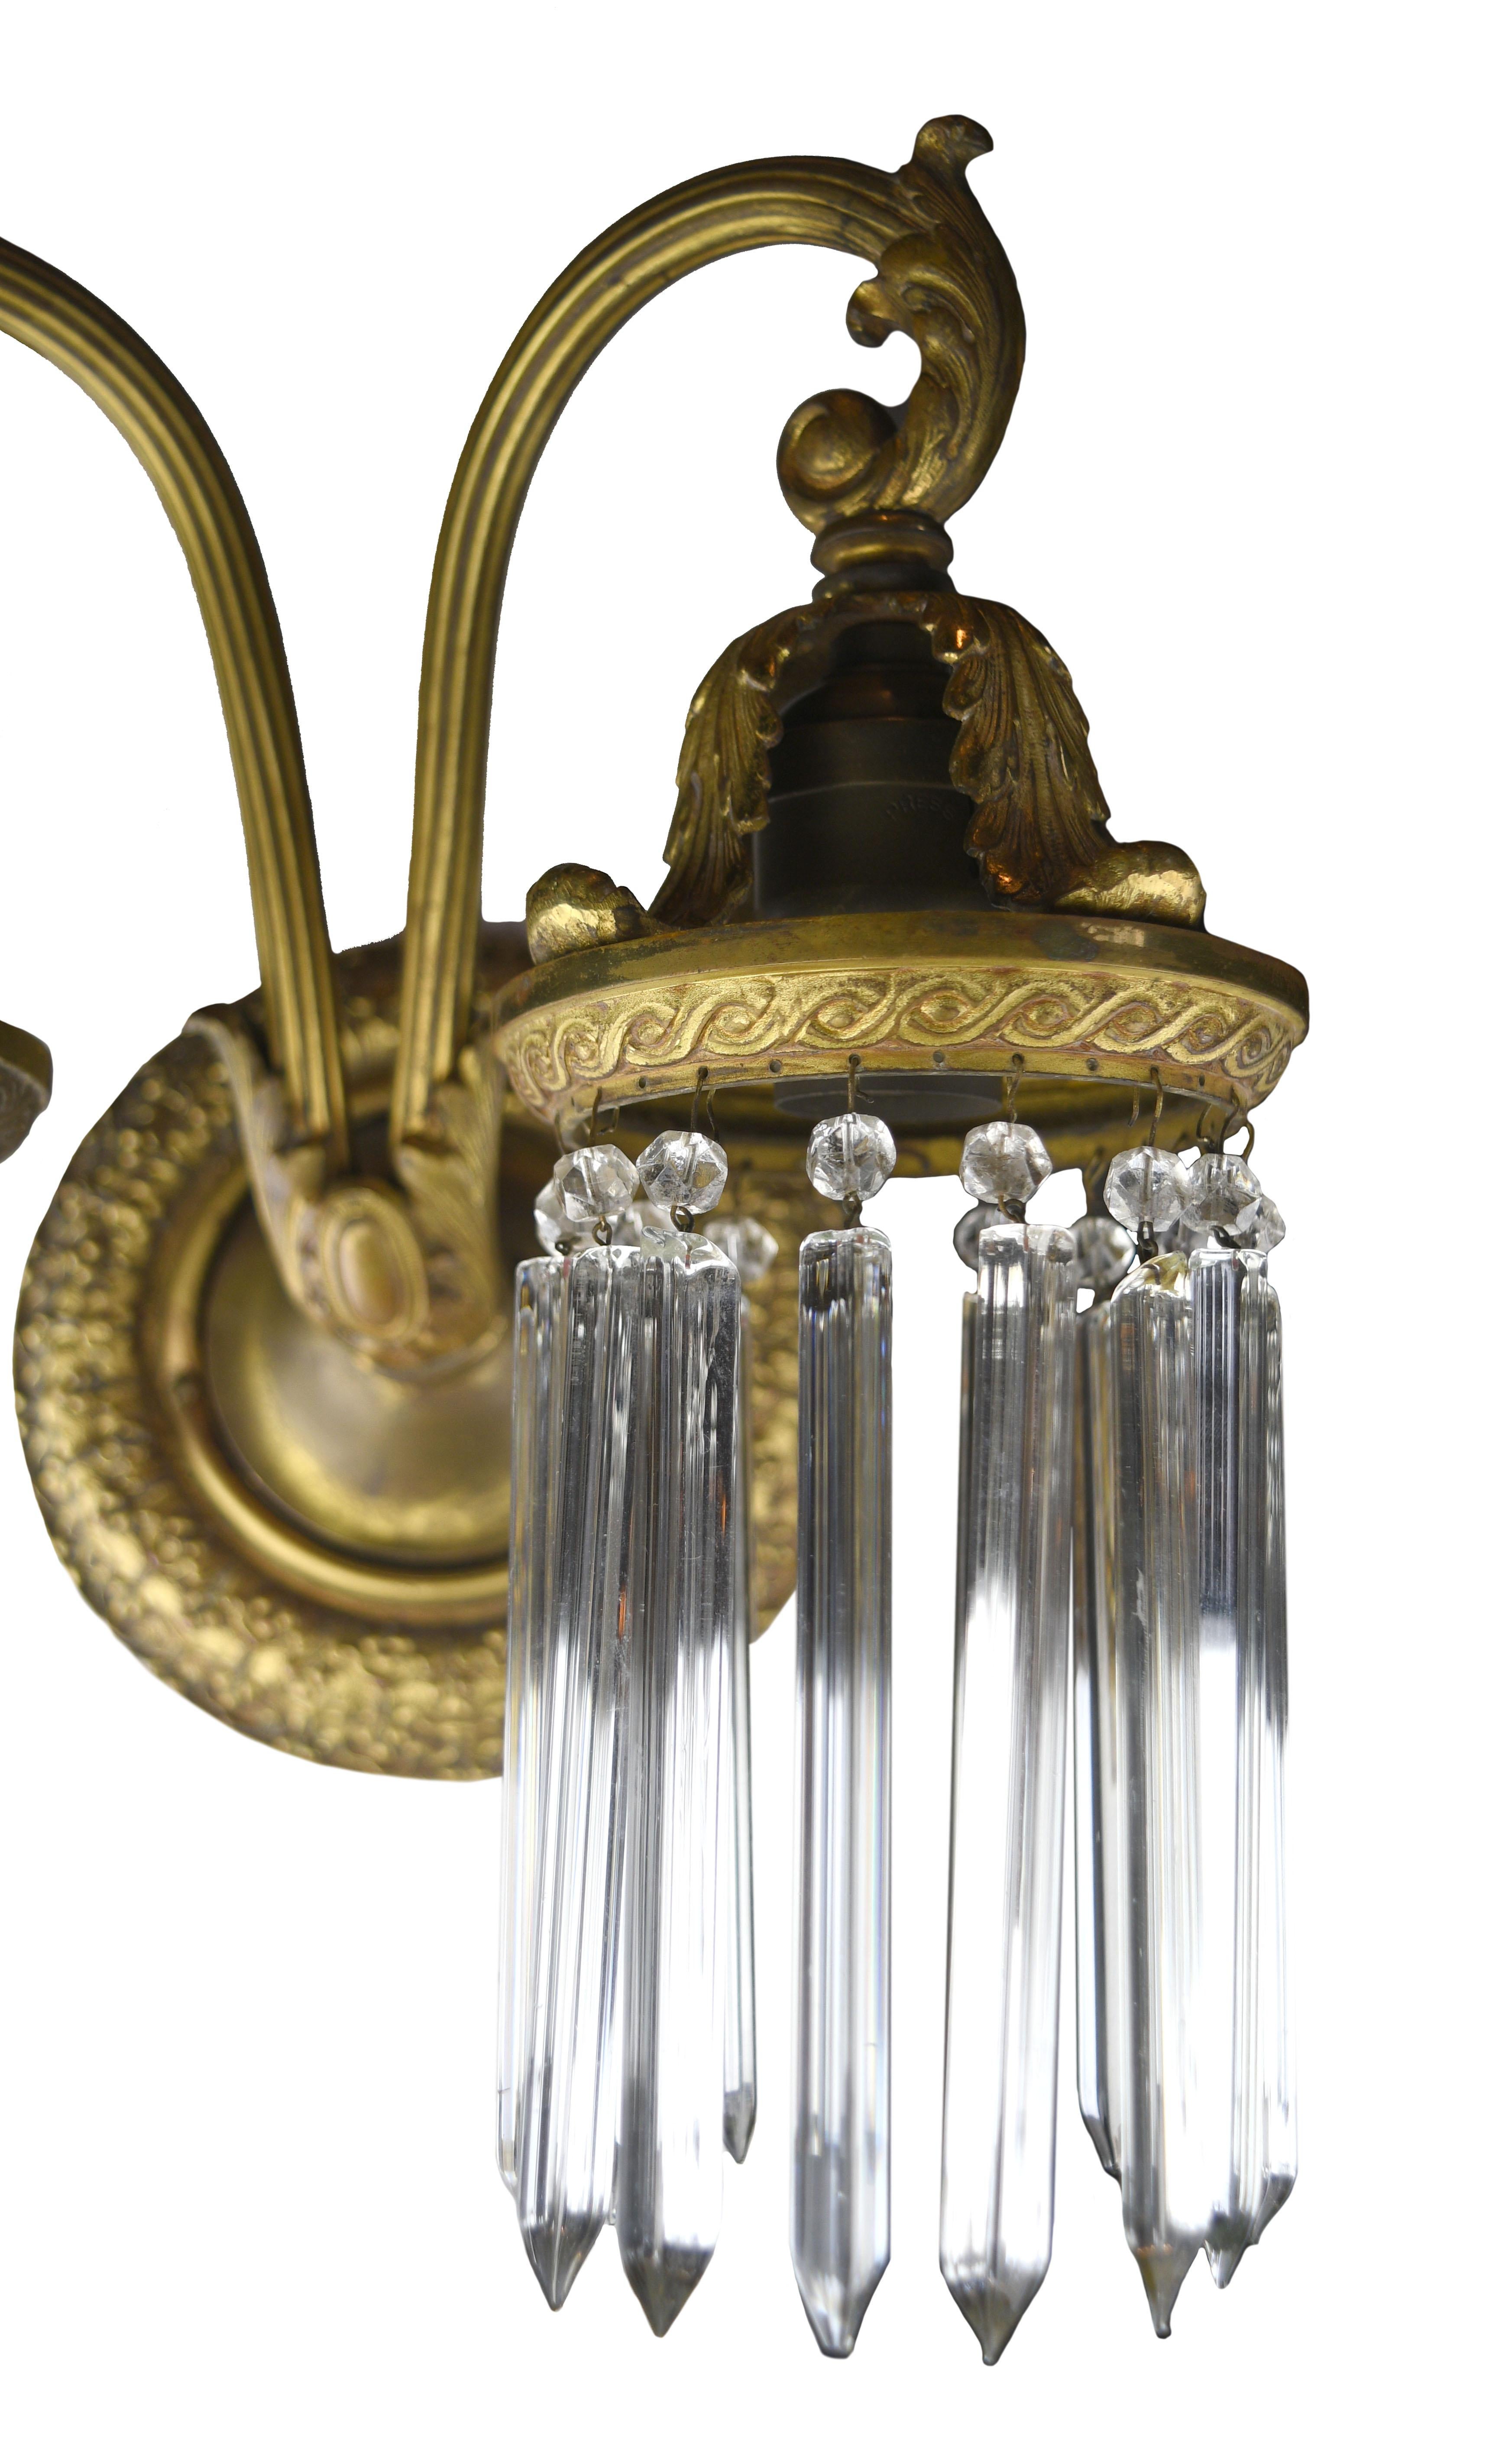 This two-arm brass sconce features 30 elegant hanging crystals and a winding floral design. The lovely brass finish perfectly contrasts the shimmering luminosity of the crystals.